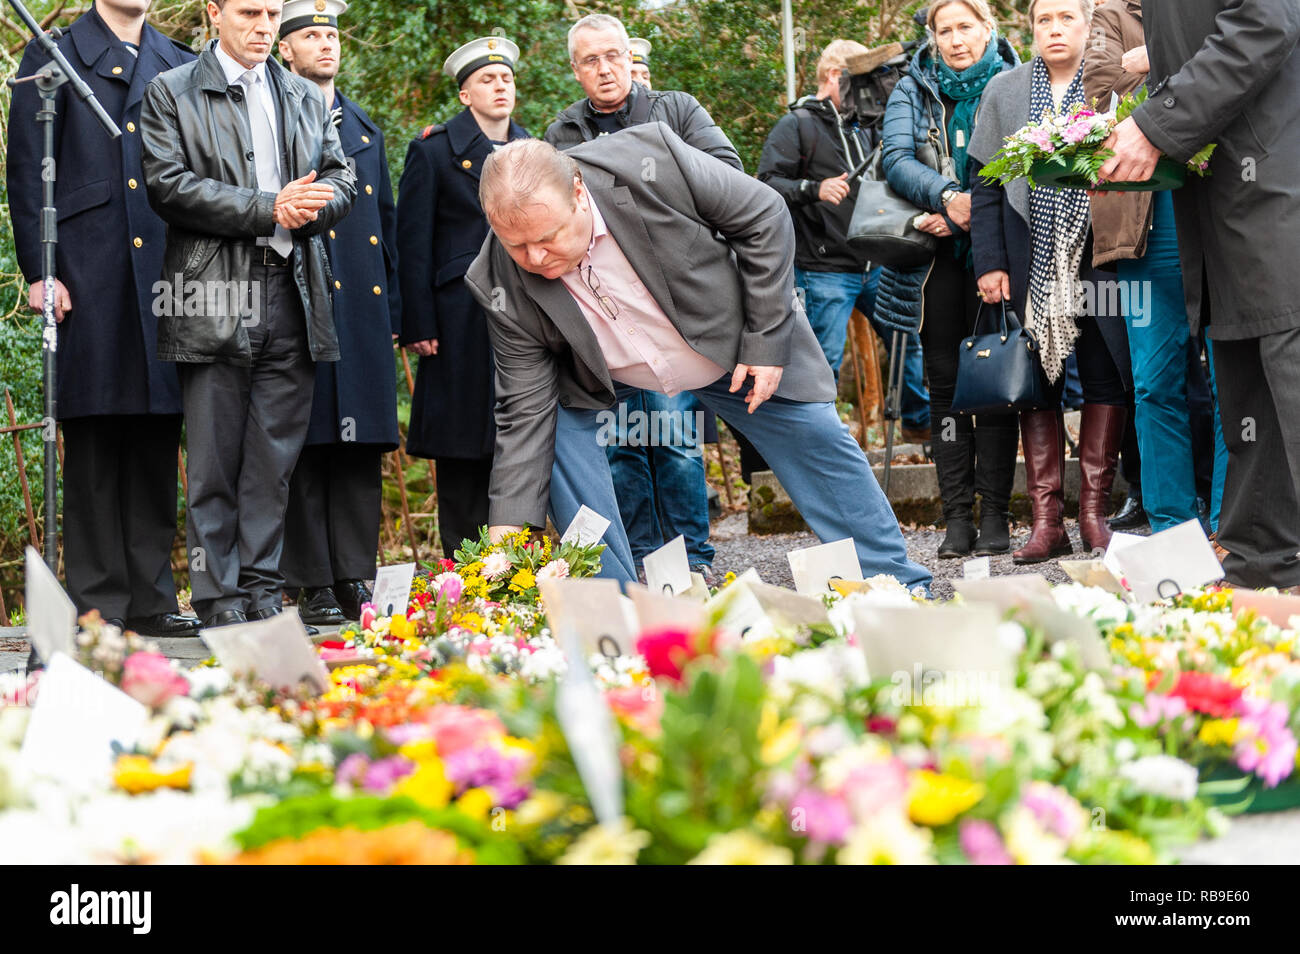 Bantry, West Cork, Ireland. 8th Jan, 2019. On the 40th Anniversary of the Whiddy Island disaster, in which the French oil tanker Betelgeuse exploded killing 50, a huge crowd attended the formalities in Abbey Graveyard, Bantry. Cllr. Danny Collins lays a wreath at the memorial.  Credit: AG News/Alamy Live News. Stock Photo